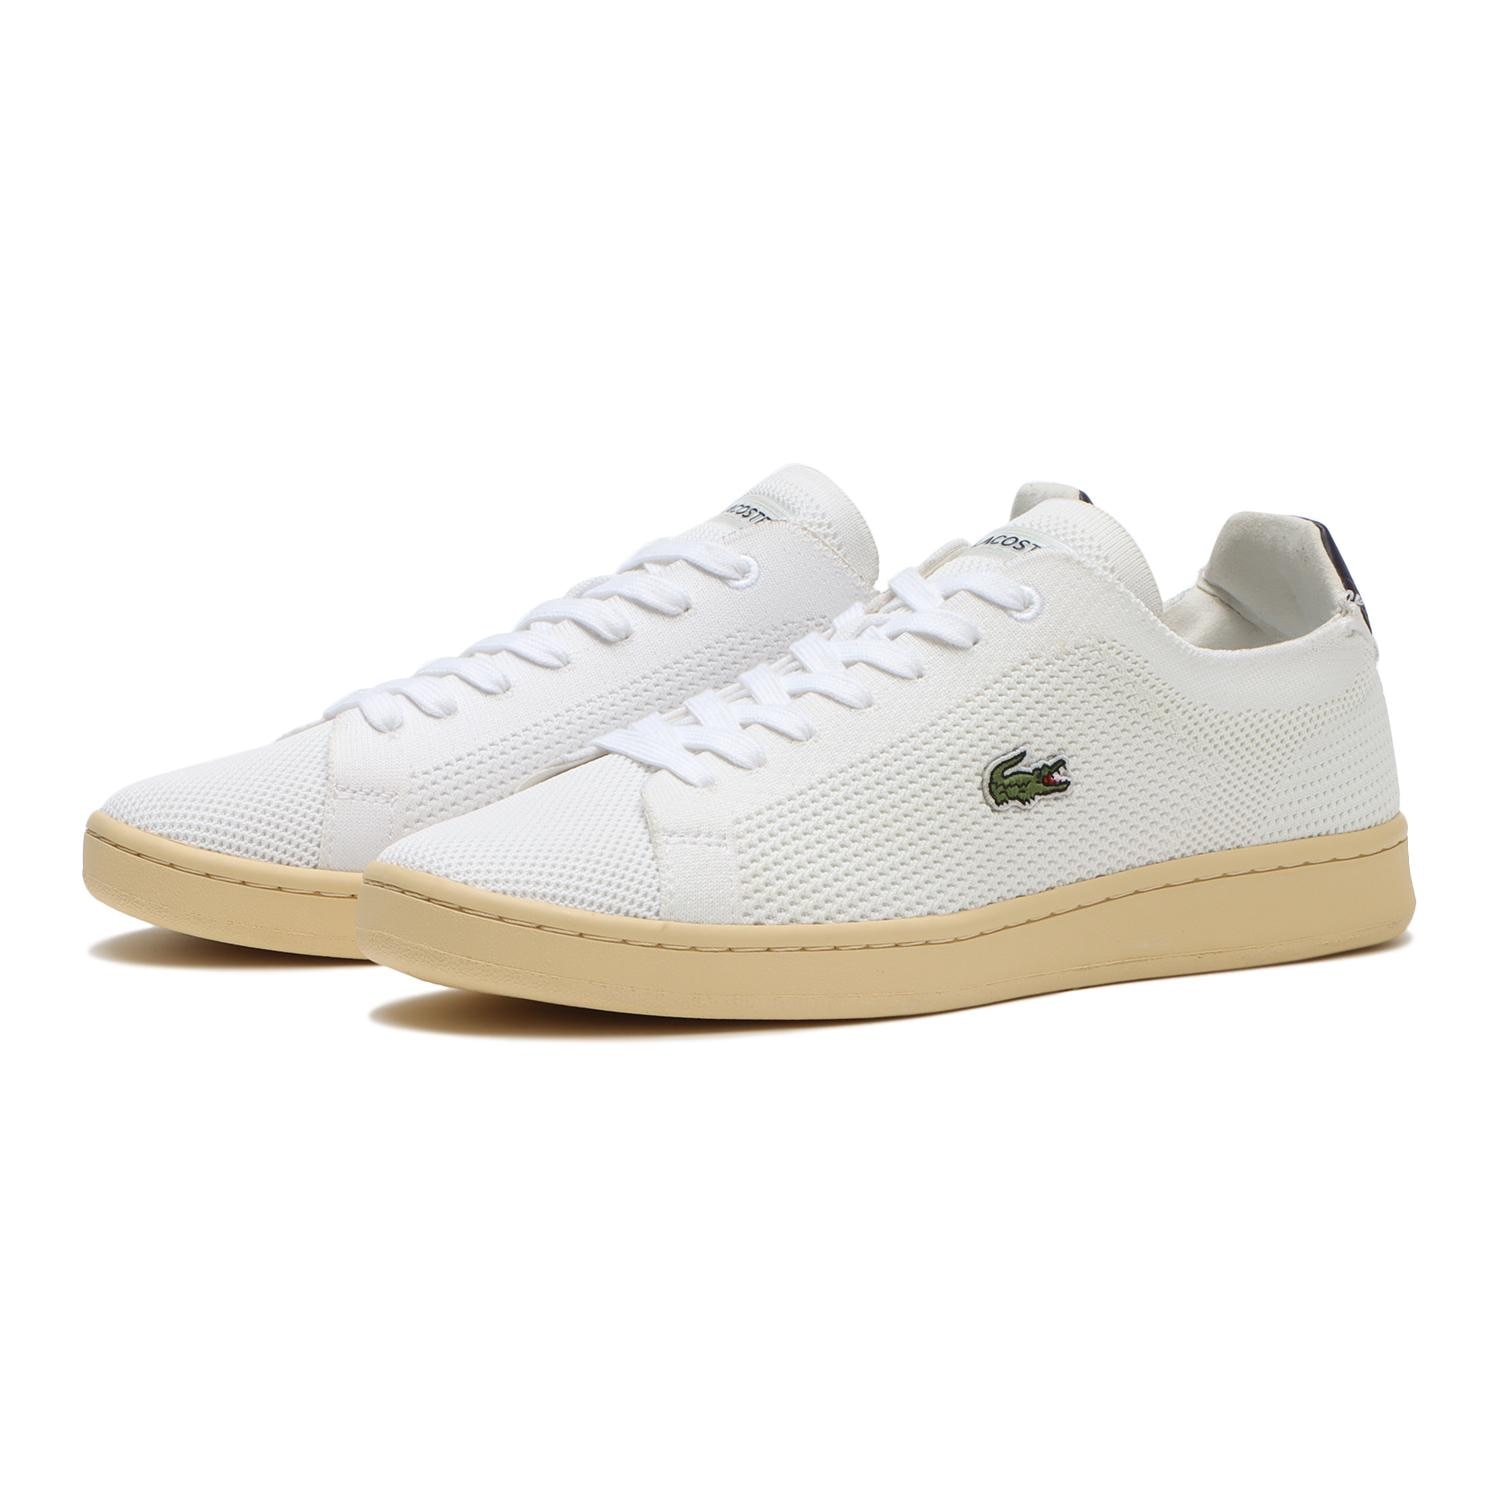 LACOSTE】CARNABY PIQUEE 123 1 SMA|ABC-MART(エービーシー・マート)の